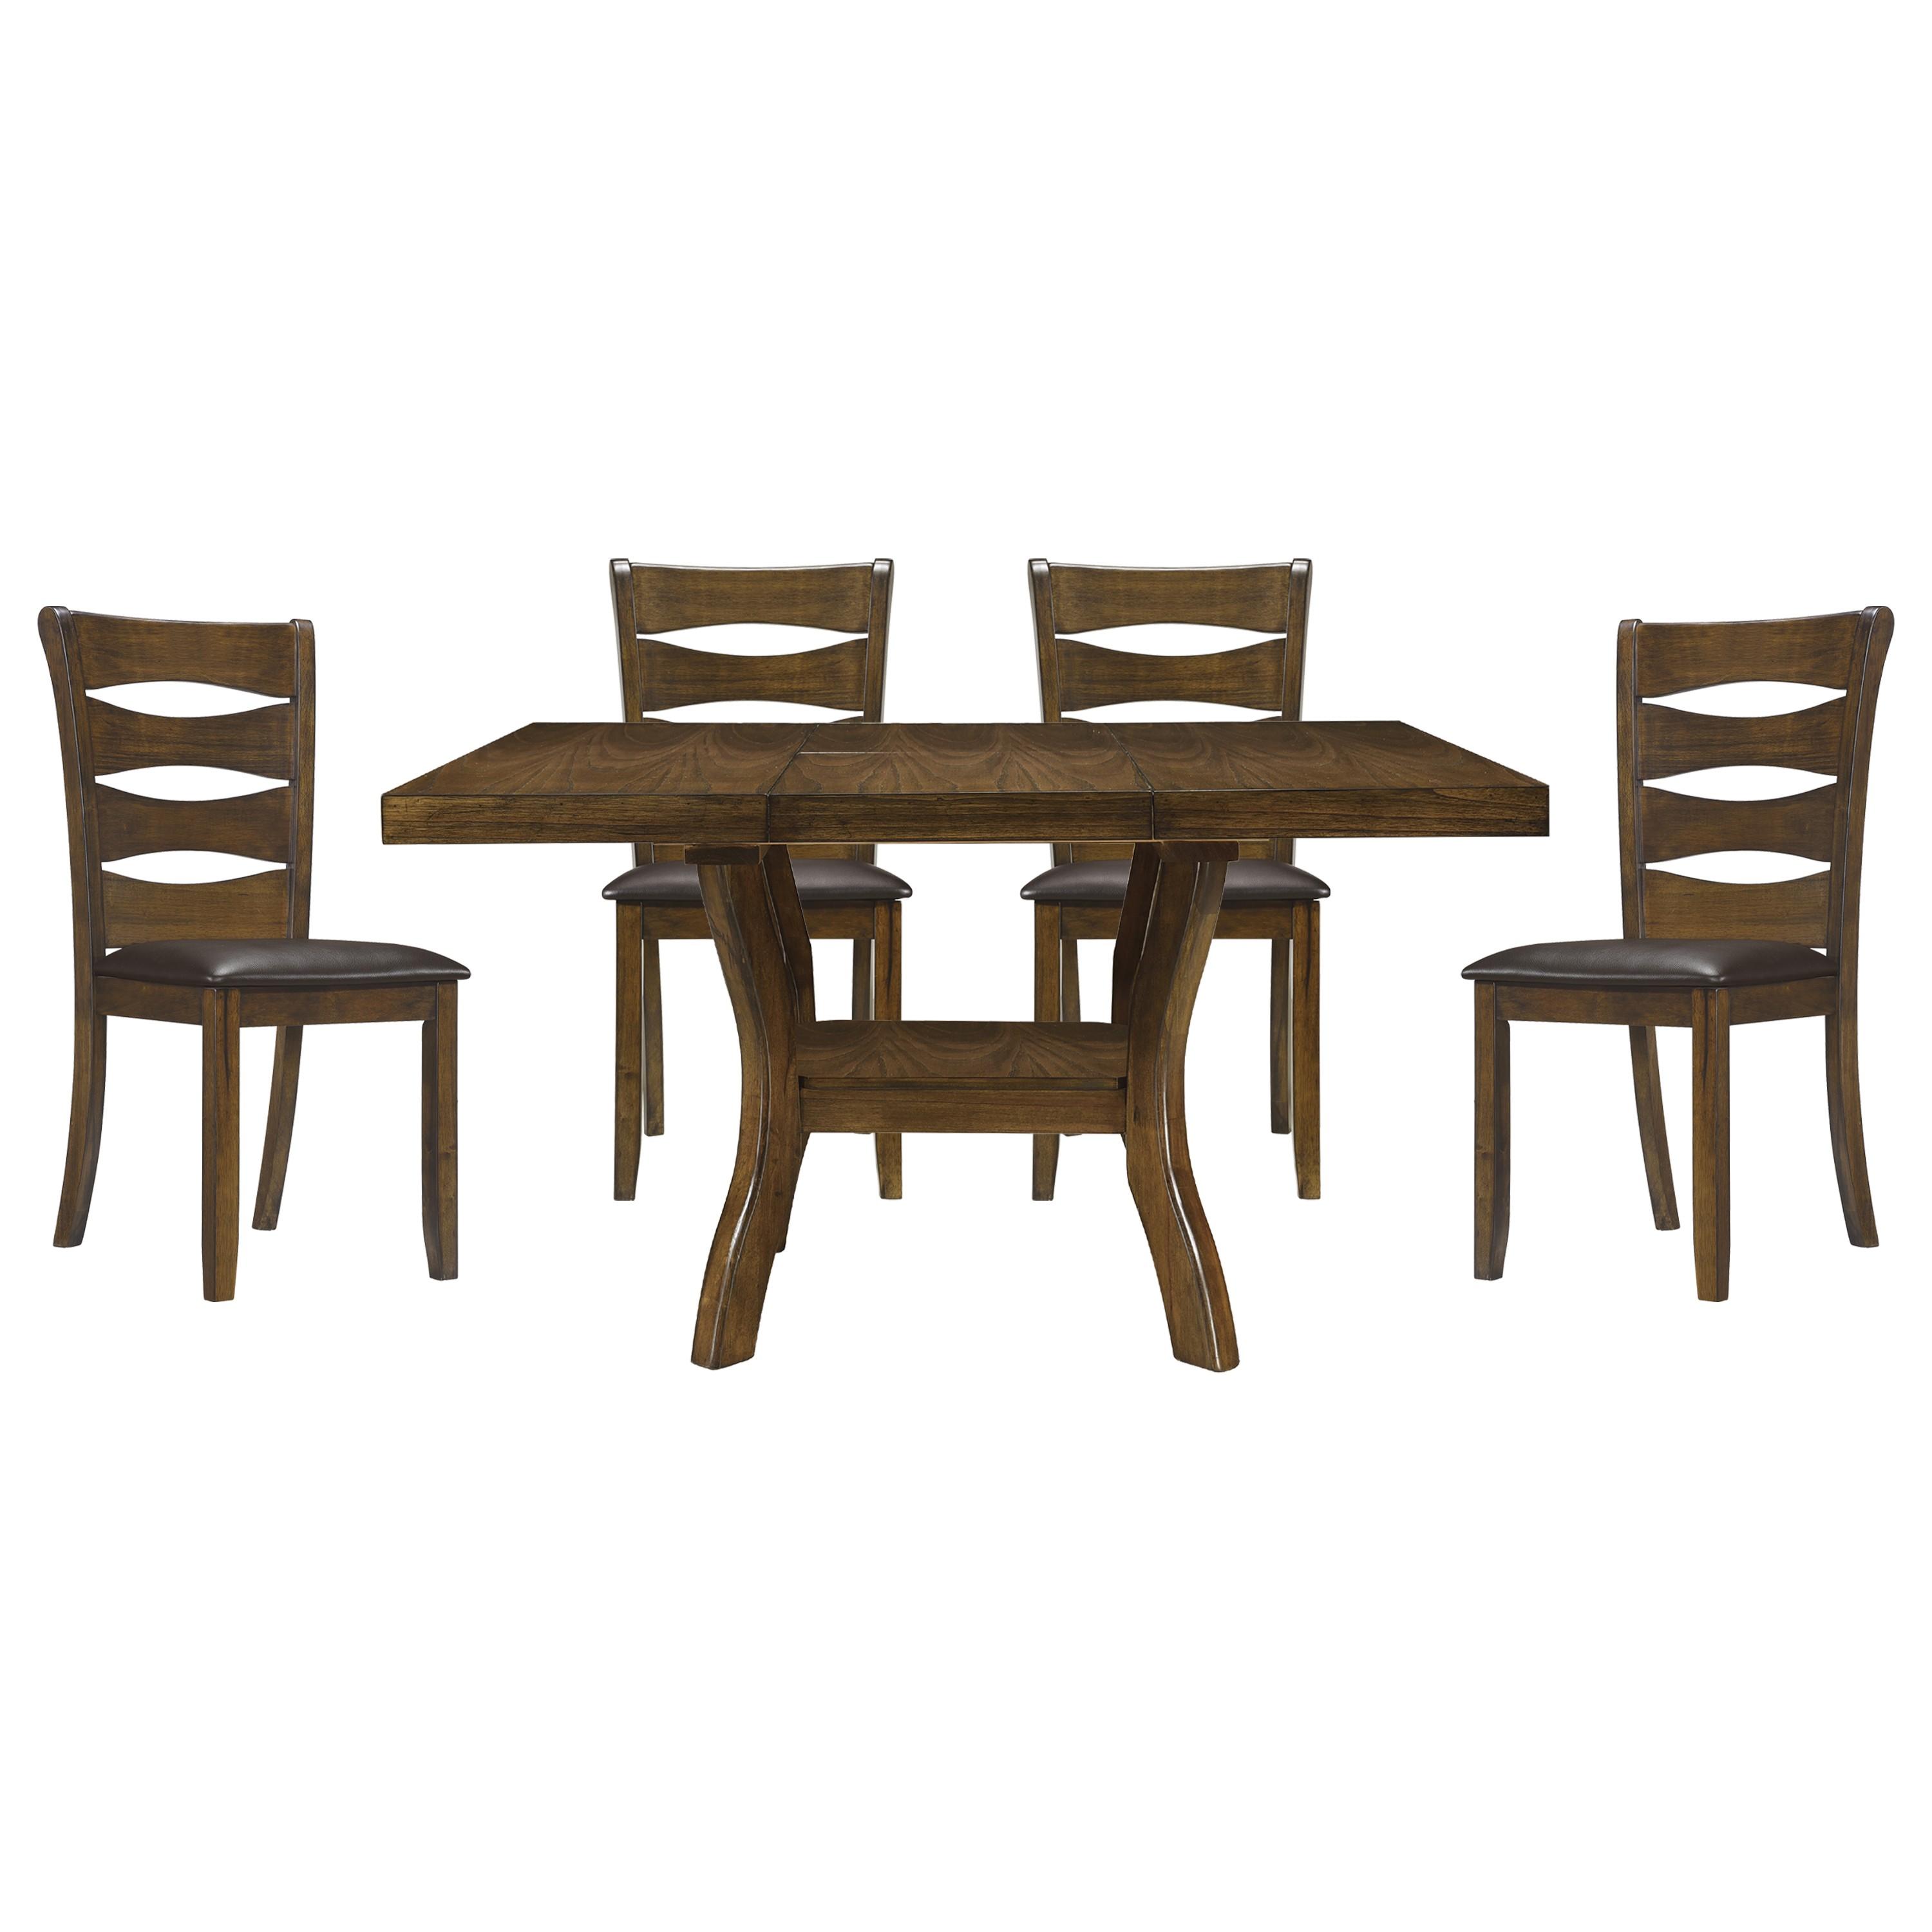 Transitional Dining Room Set 5712-54*5PC Darla 5712-54*5PC in Brown Faux Leather